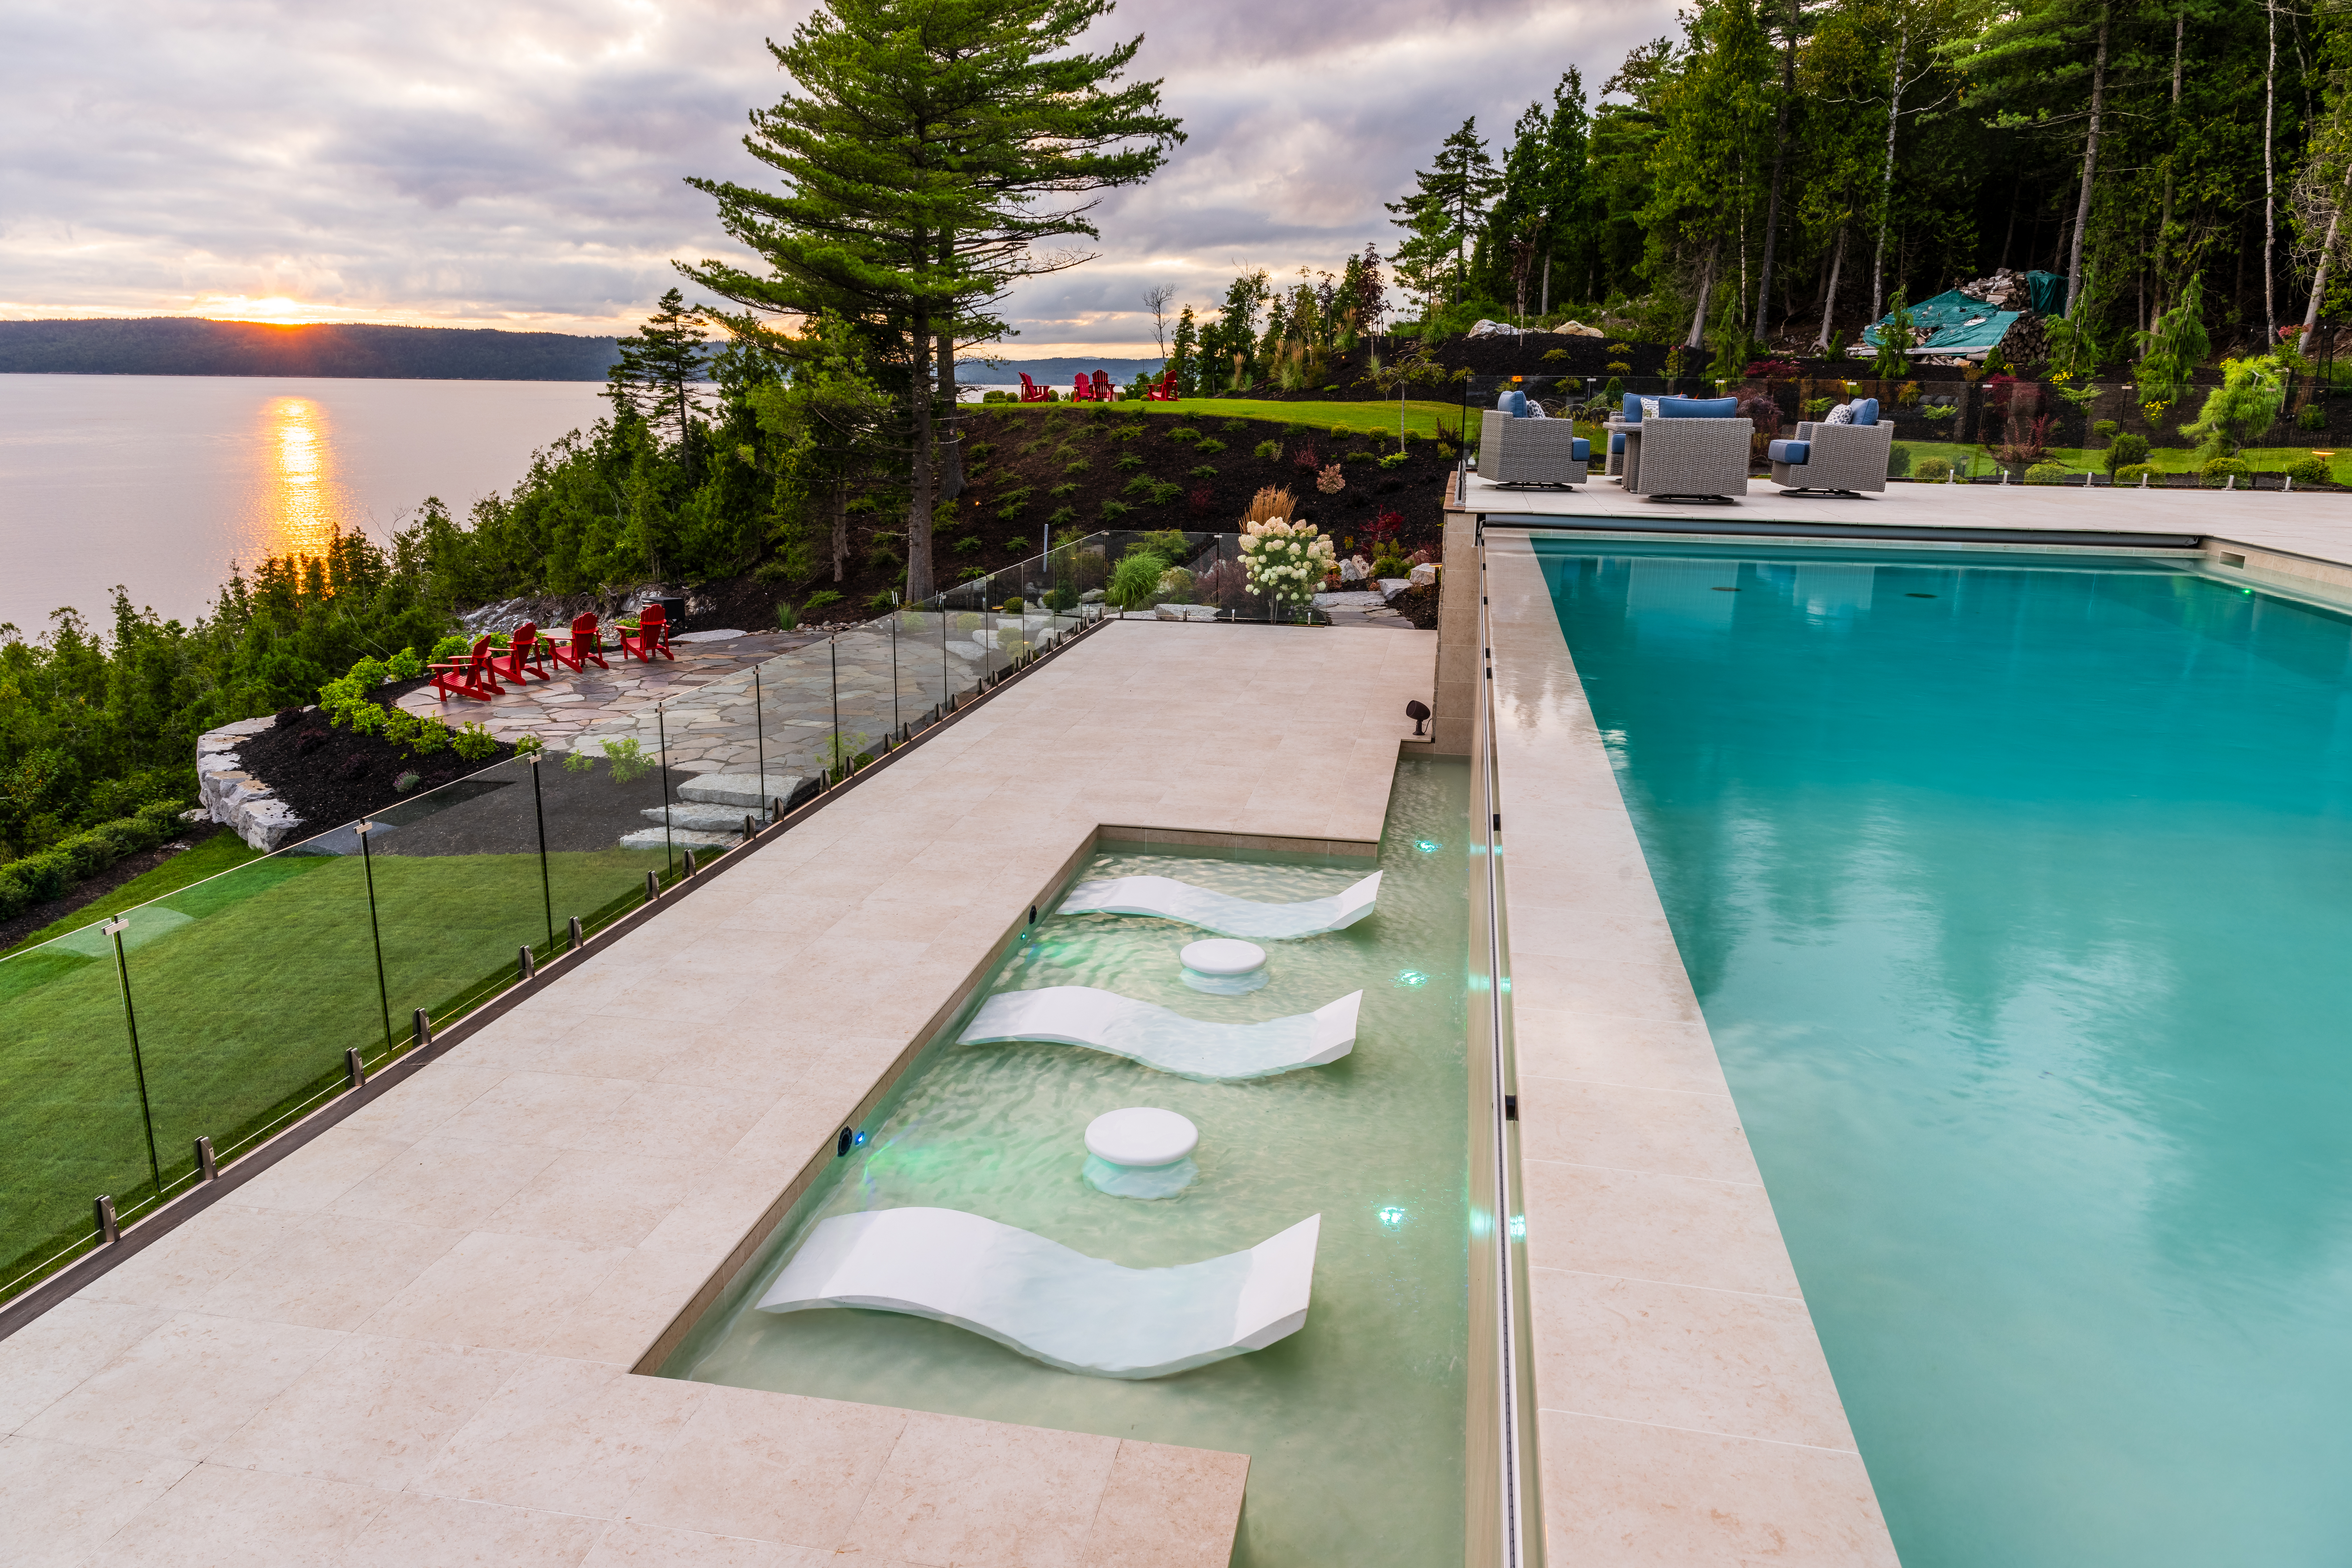 The sun sets on multi-level pool next to a large body of water.